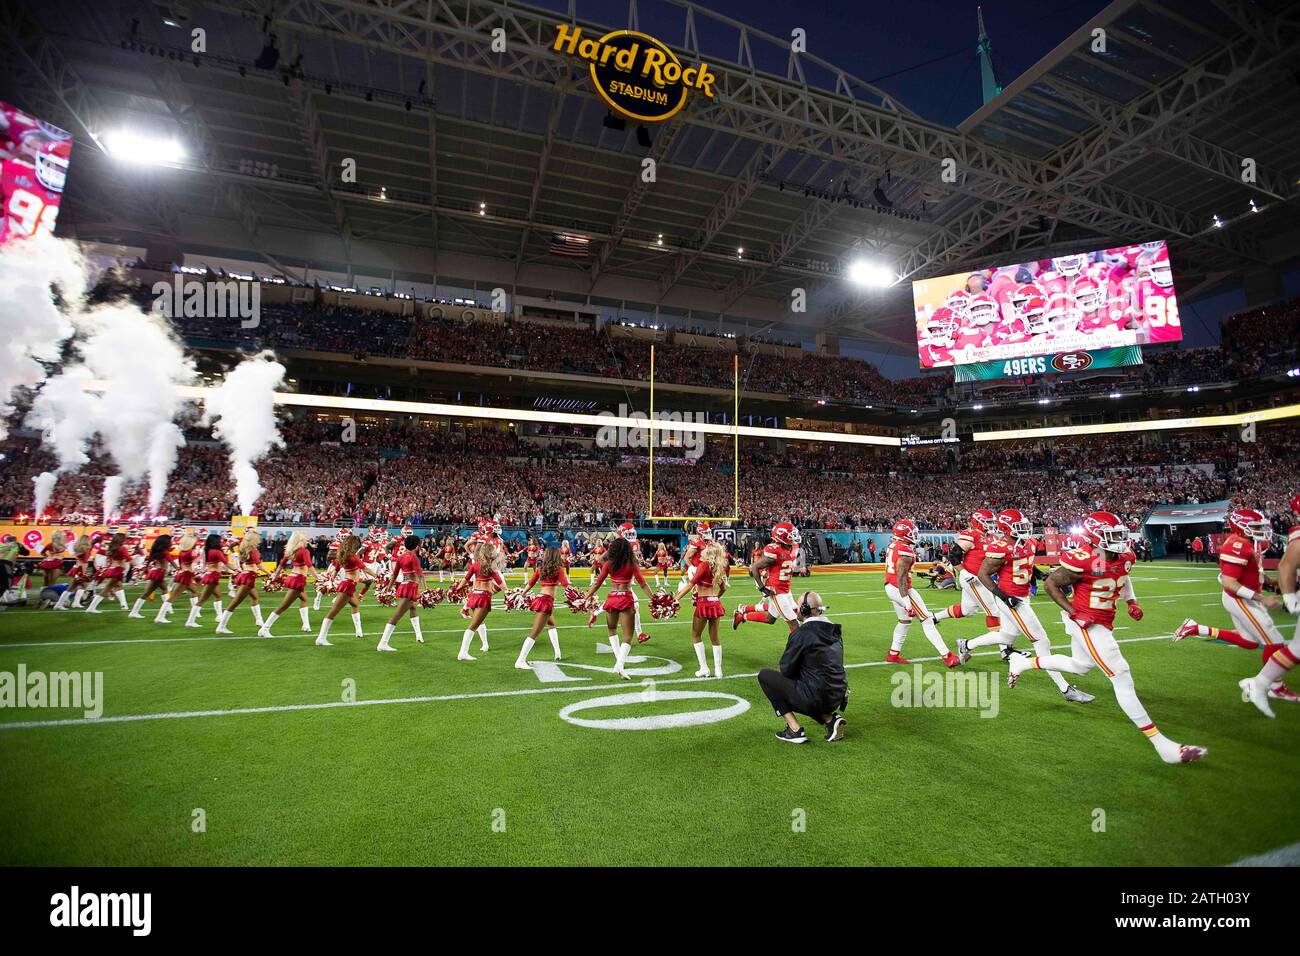 Miami Gardens, Florida, USA. 2nd Feb, 2020. Kansas City Chiefs take the field against the San Francisco 49ers in NFL Super Bowl LIV at Hard Rock Stadium.The Chiefs beat the 49ers 31-20. Credit: Paul Kitagaki Jr./ZUMA Wire/Alamy Live News Stock Photo